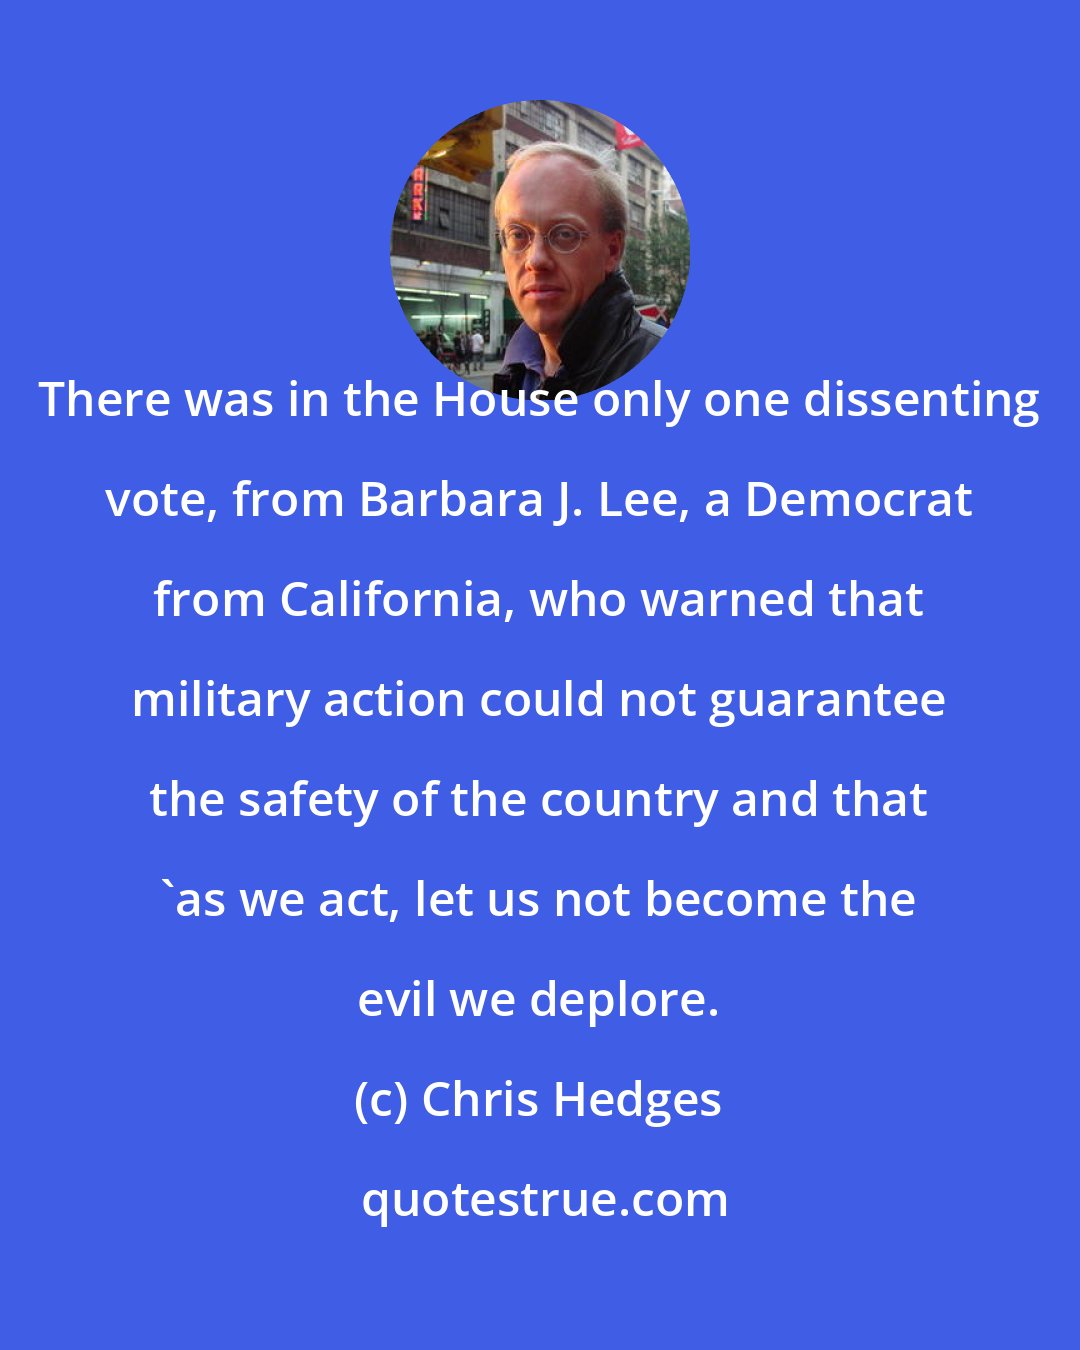 Chris Hedges: There was in the House only one dissenting vote, from Barbara J. Lee, a Democrat from California, who warned that military action could not guarantee the safety of the country and that 'as we act, let us not become the evil we deplore.